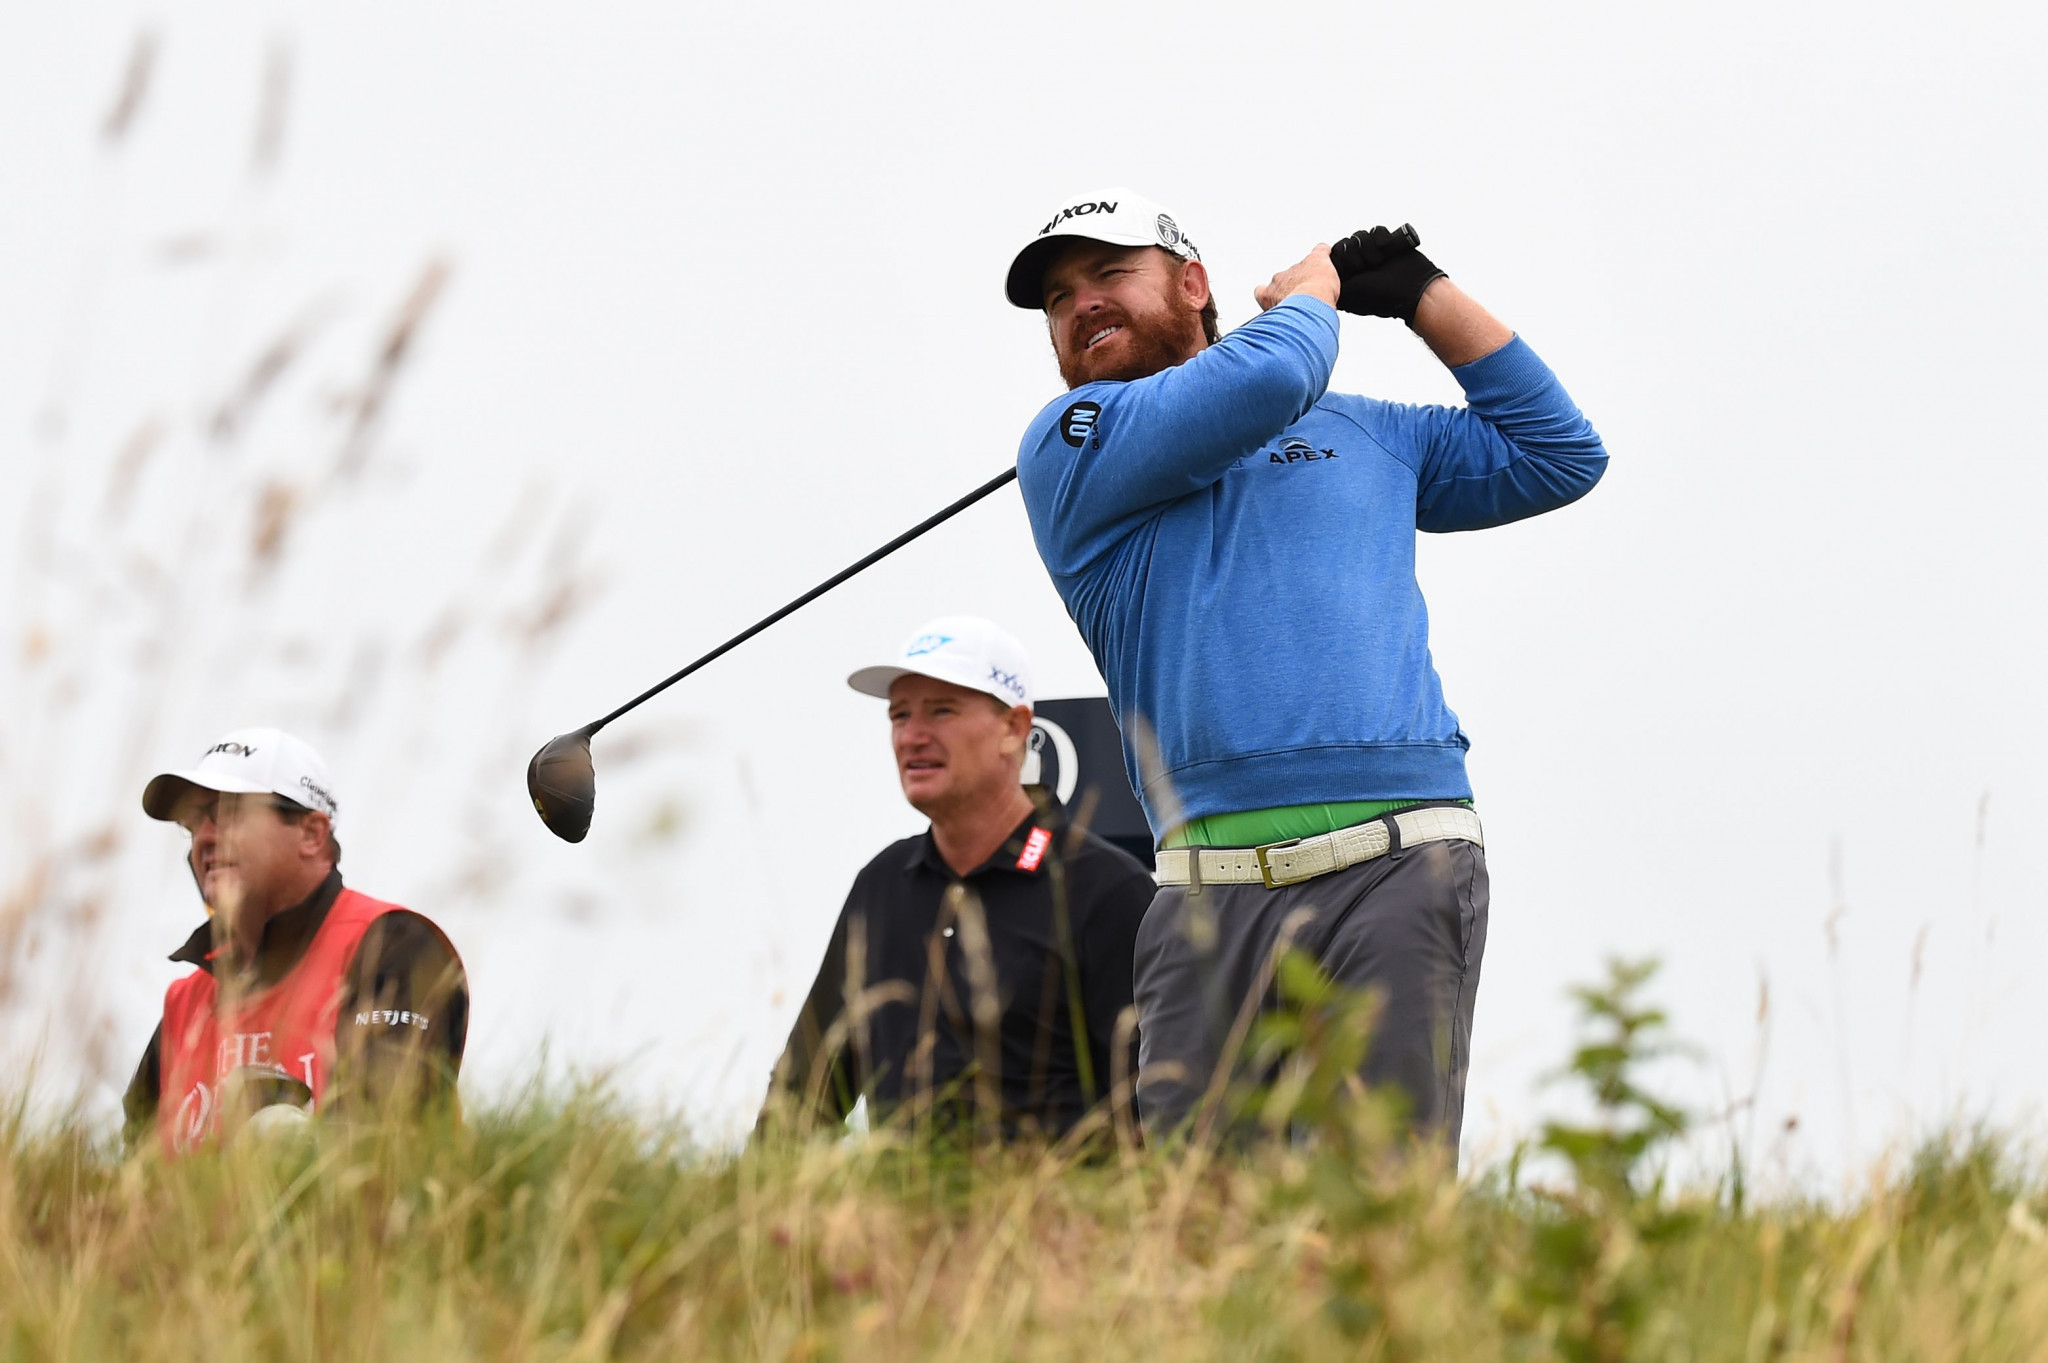 Overnight leader JB Holmes is tied with Shane Lowry after the second round ©Getty Images